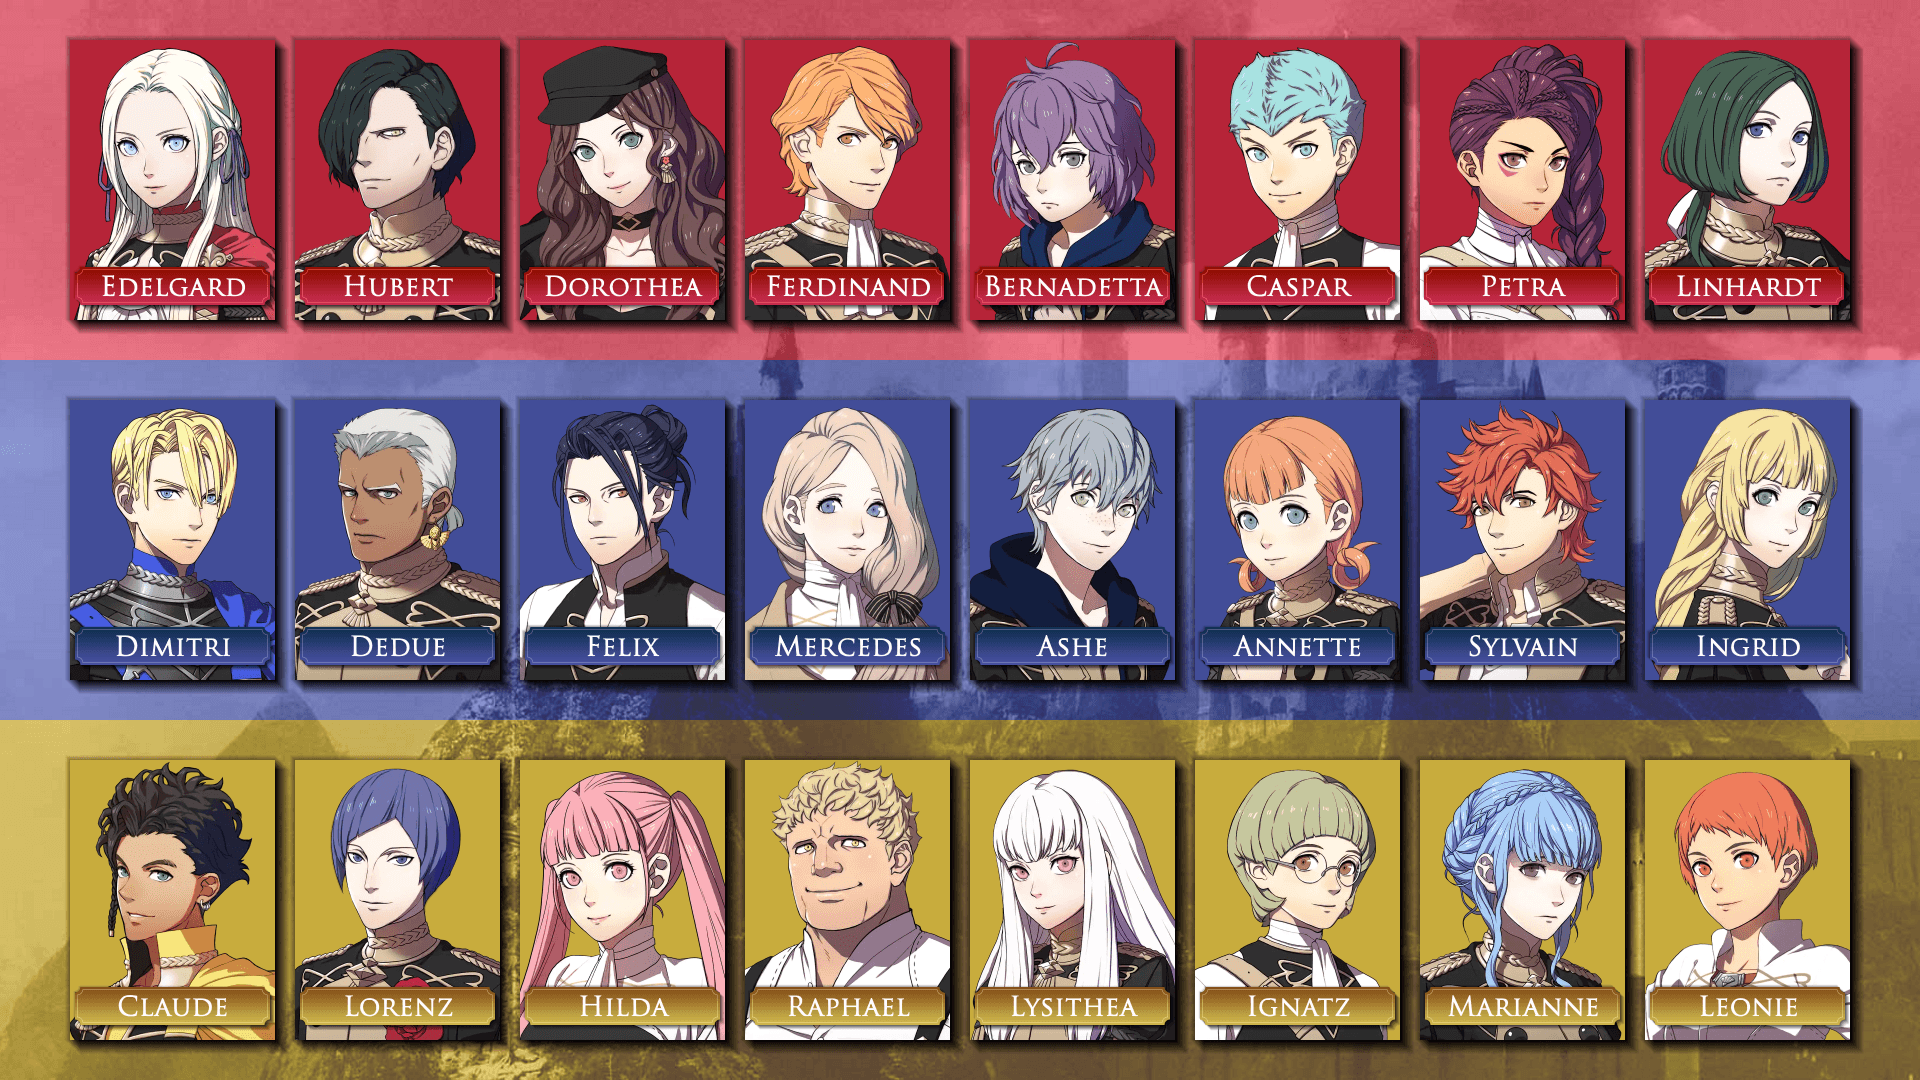 I made a desktop wallpaper featuring the students of Three Houses